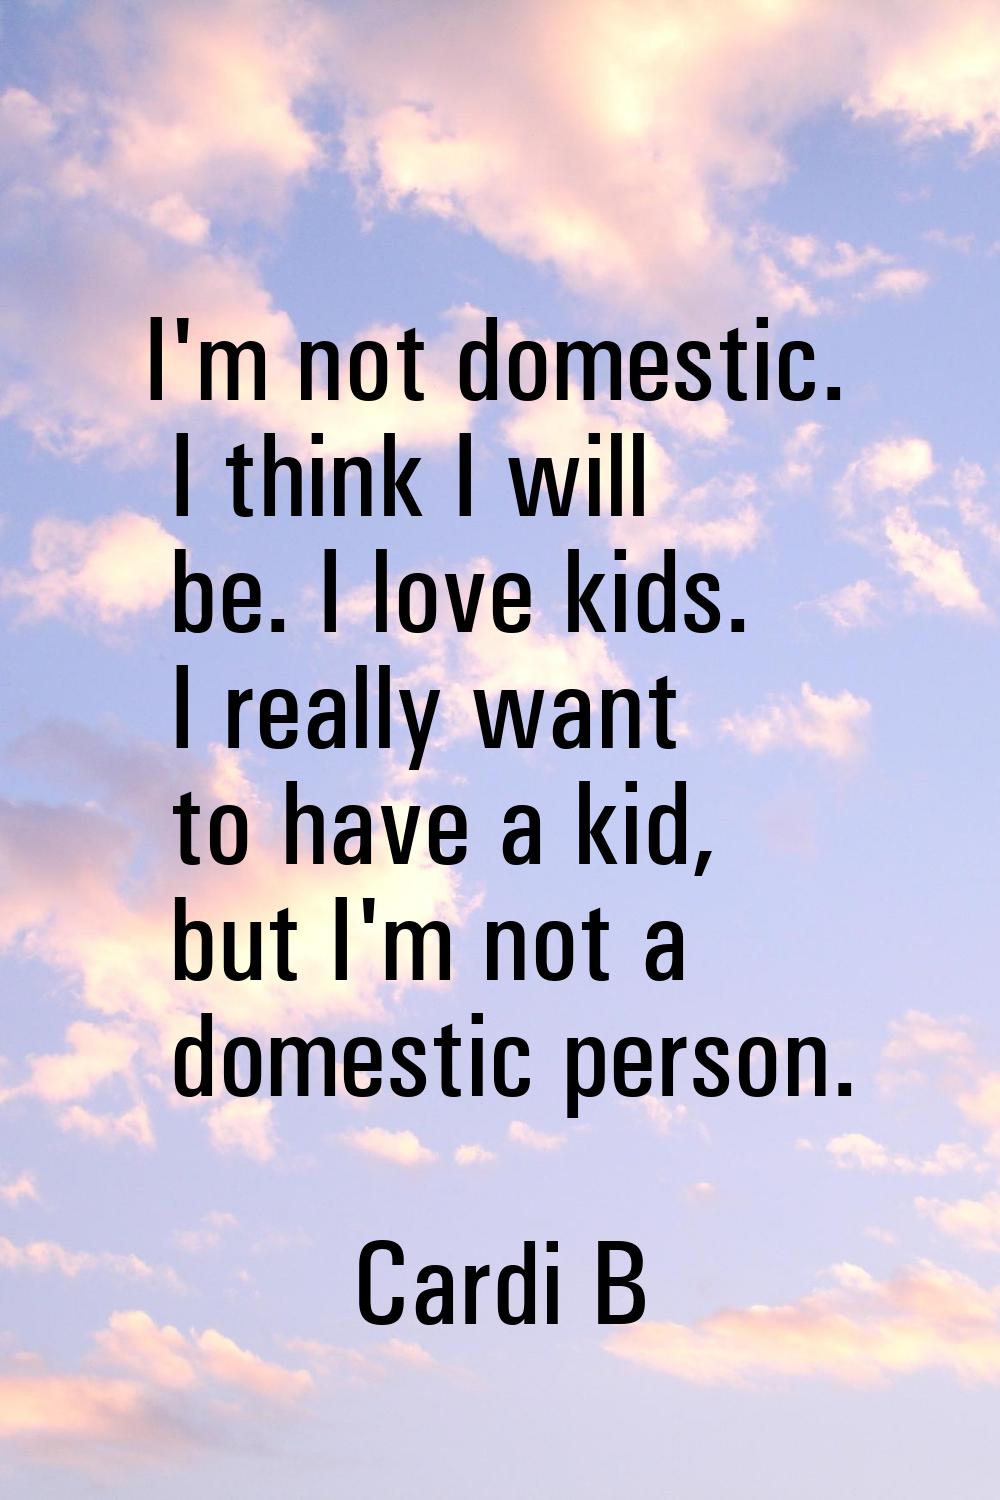 I'm not domestic. I think I will be. I love kids. I really want to have a kid, but I'm not a domest